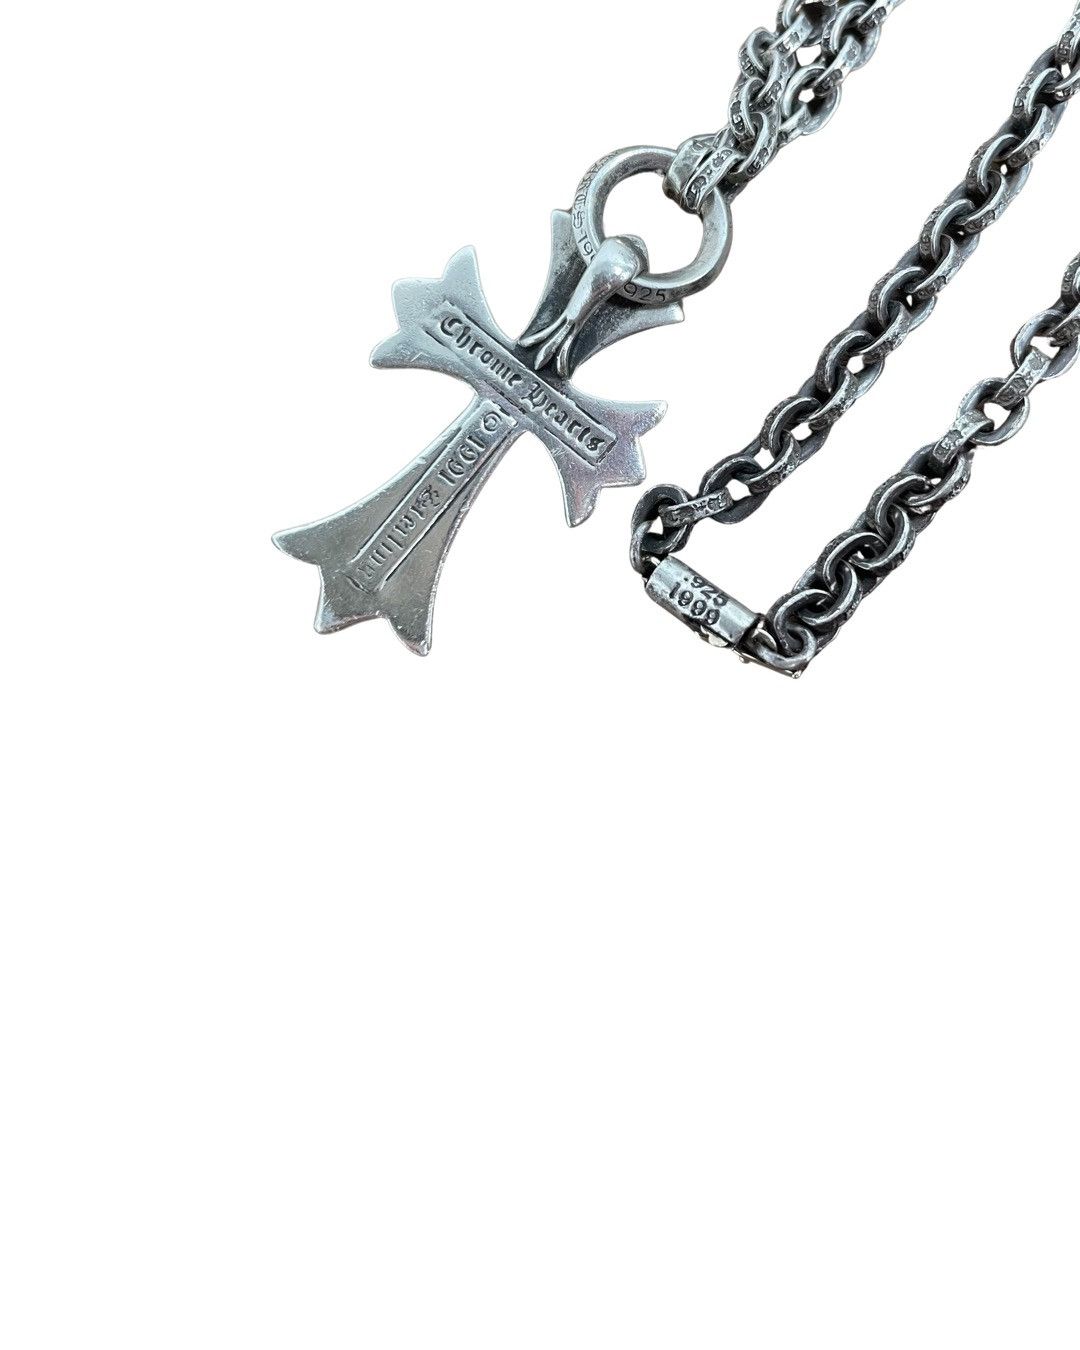 Paper chain cross necklace - 3